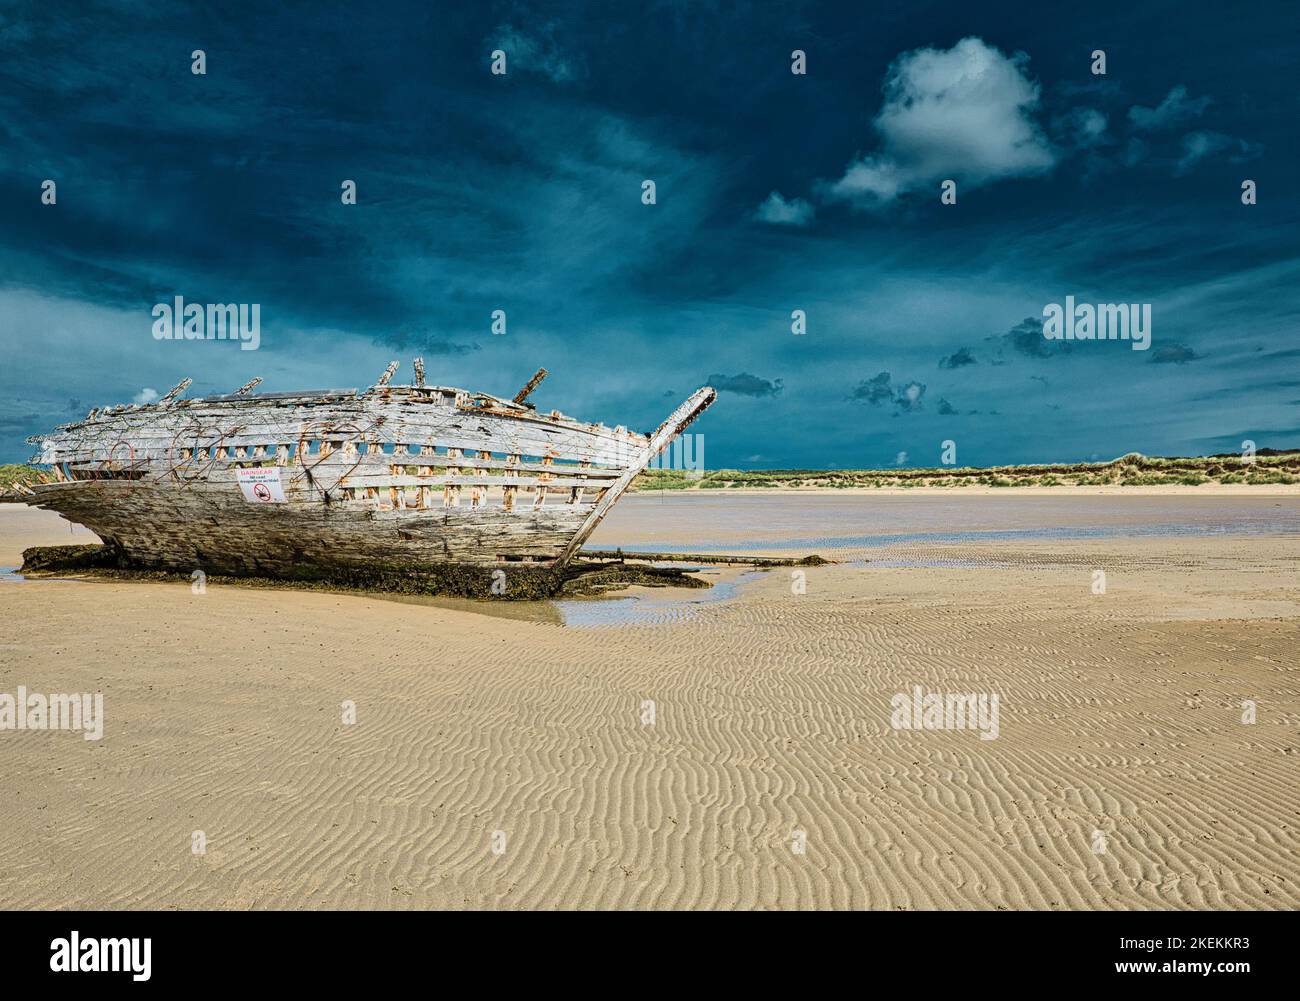 Bad Eddie's (Eddie's Boat) wooden boat shipwrecked in the early 1970's, Magheraclogher Beach, Gweedore, (Gaoth Dobhair) County Donegal, Ireland Stock Photo